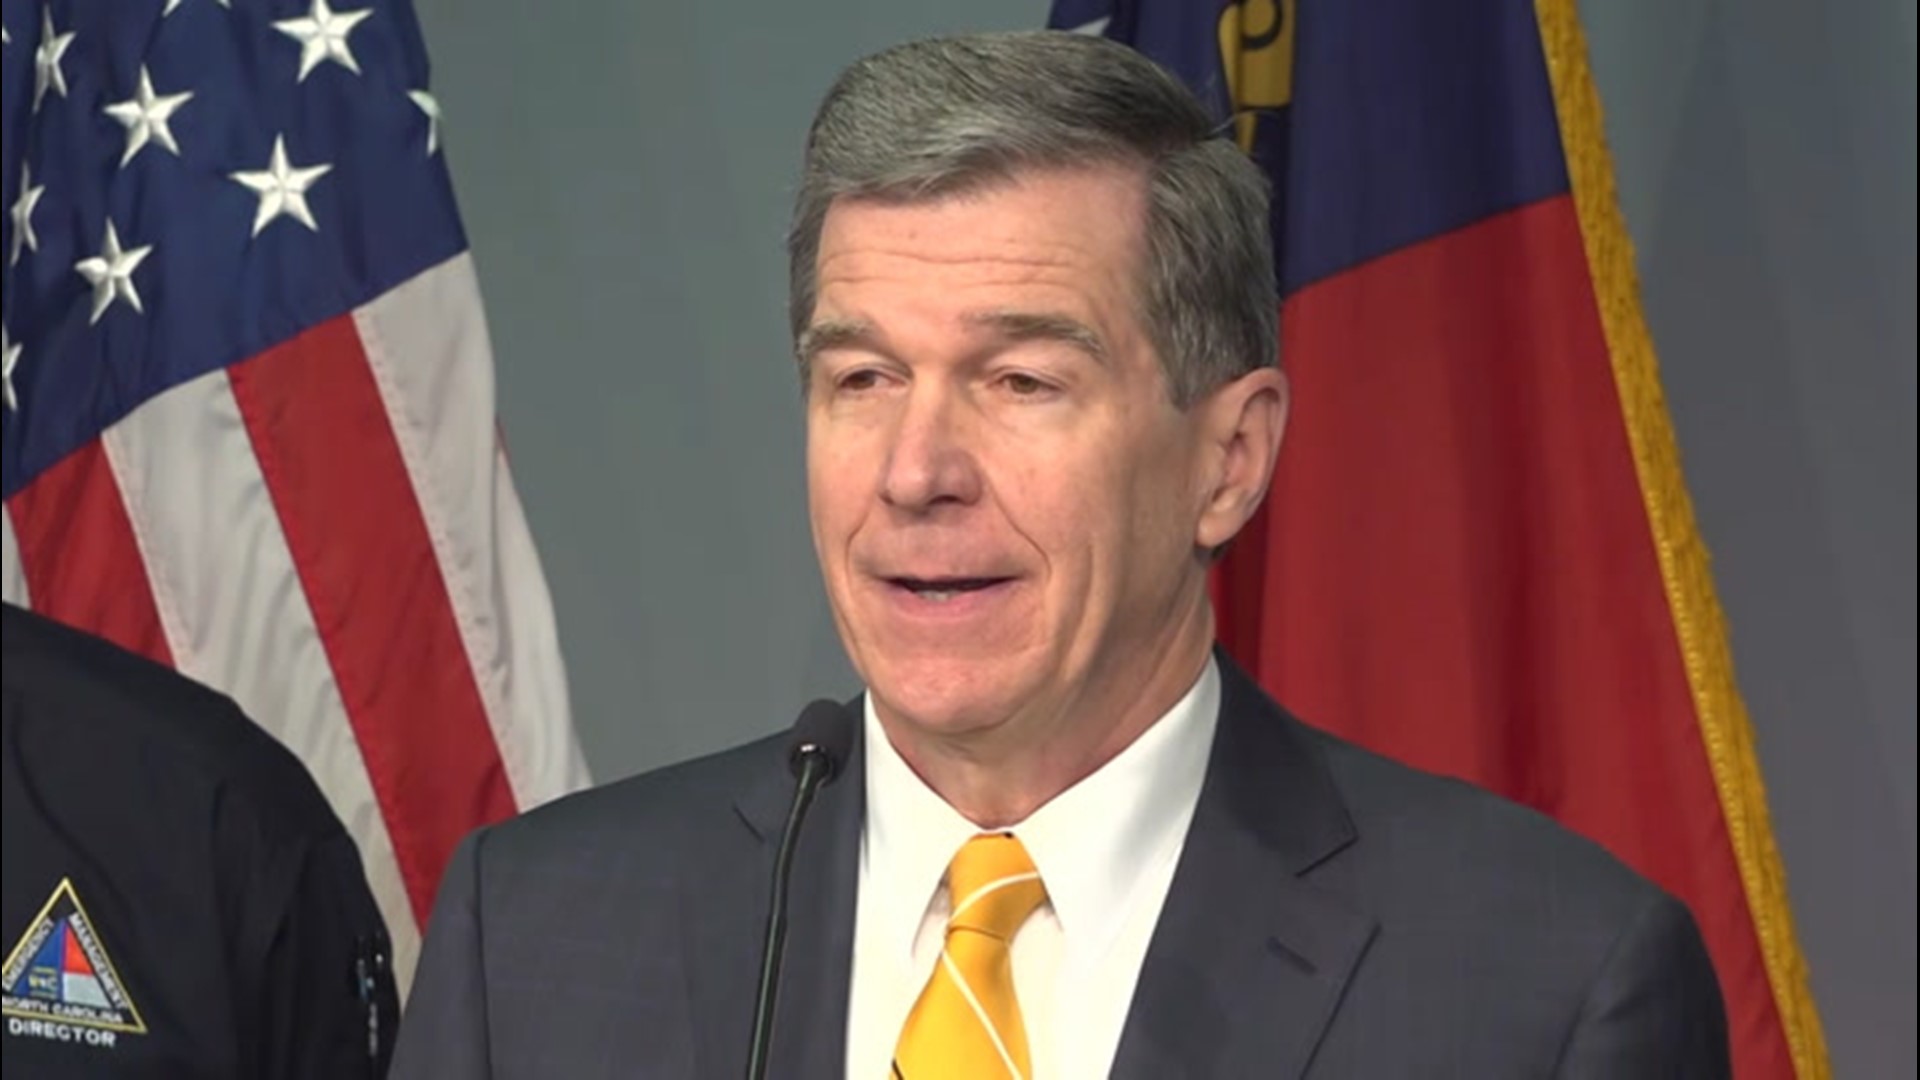 Governor Roy Cooper addressed preparations for the upcoming winter storm and how people can stay safe on Feb. 20.